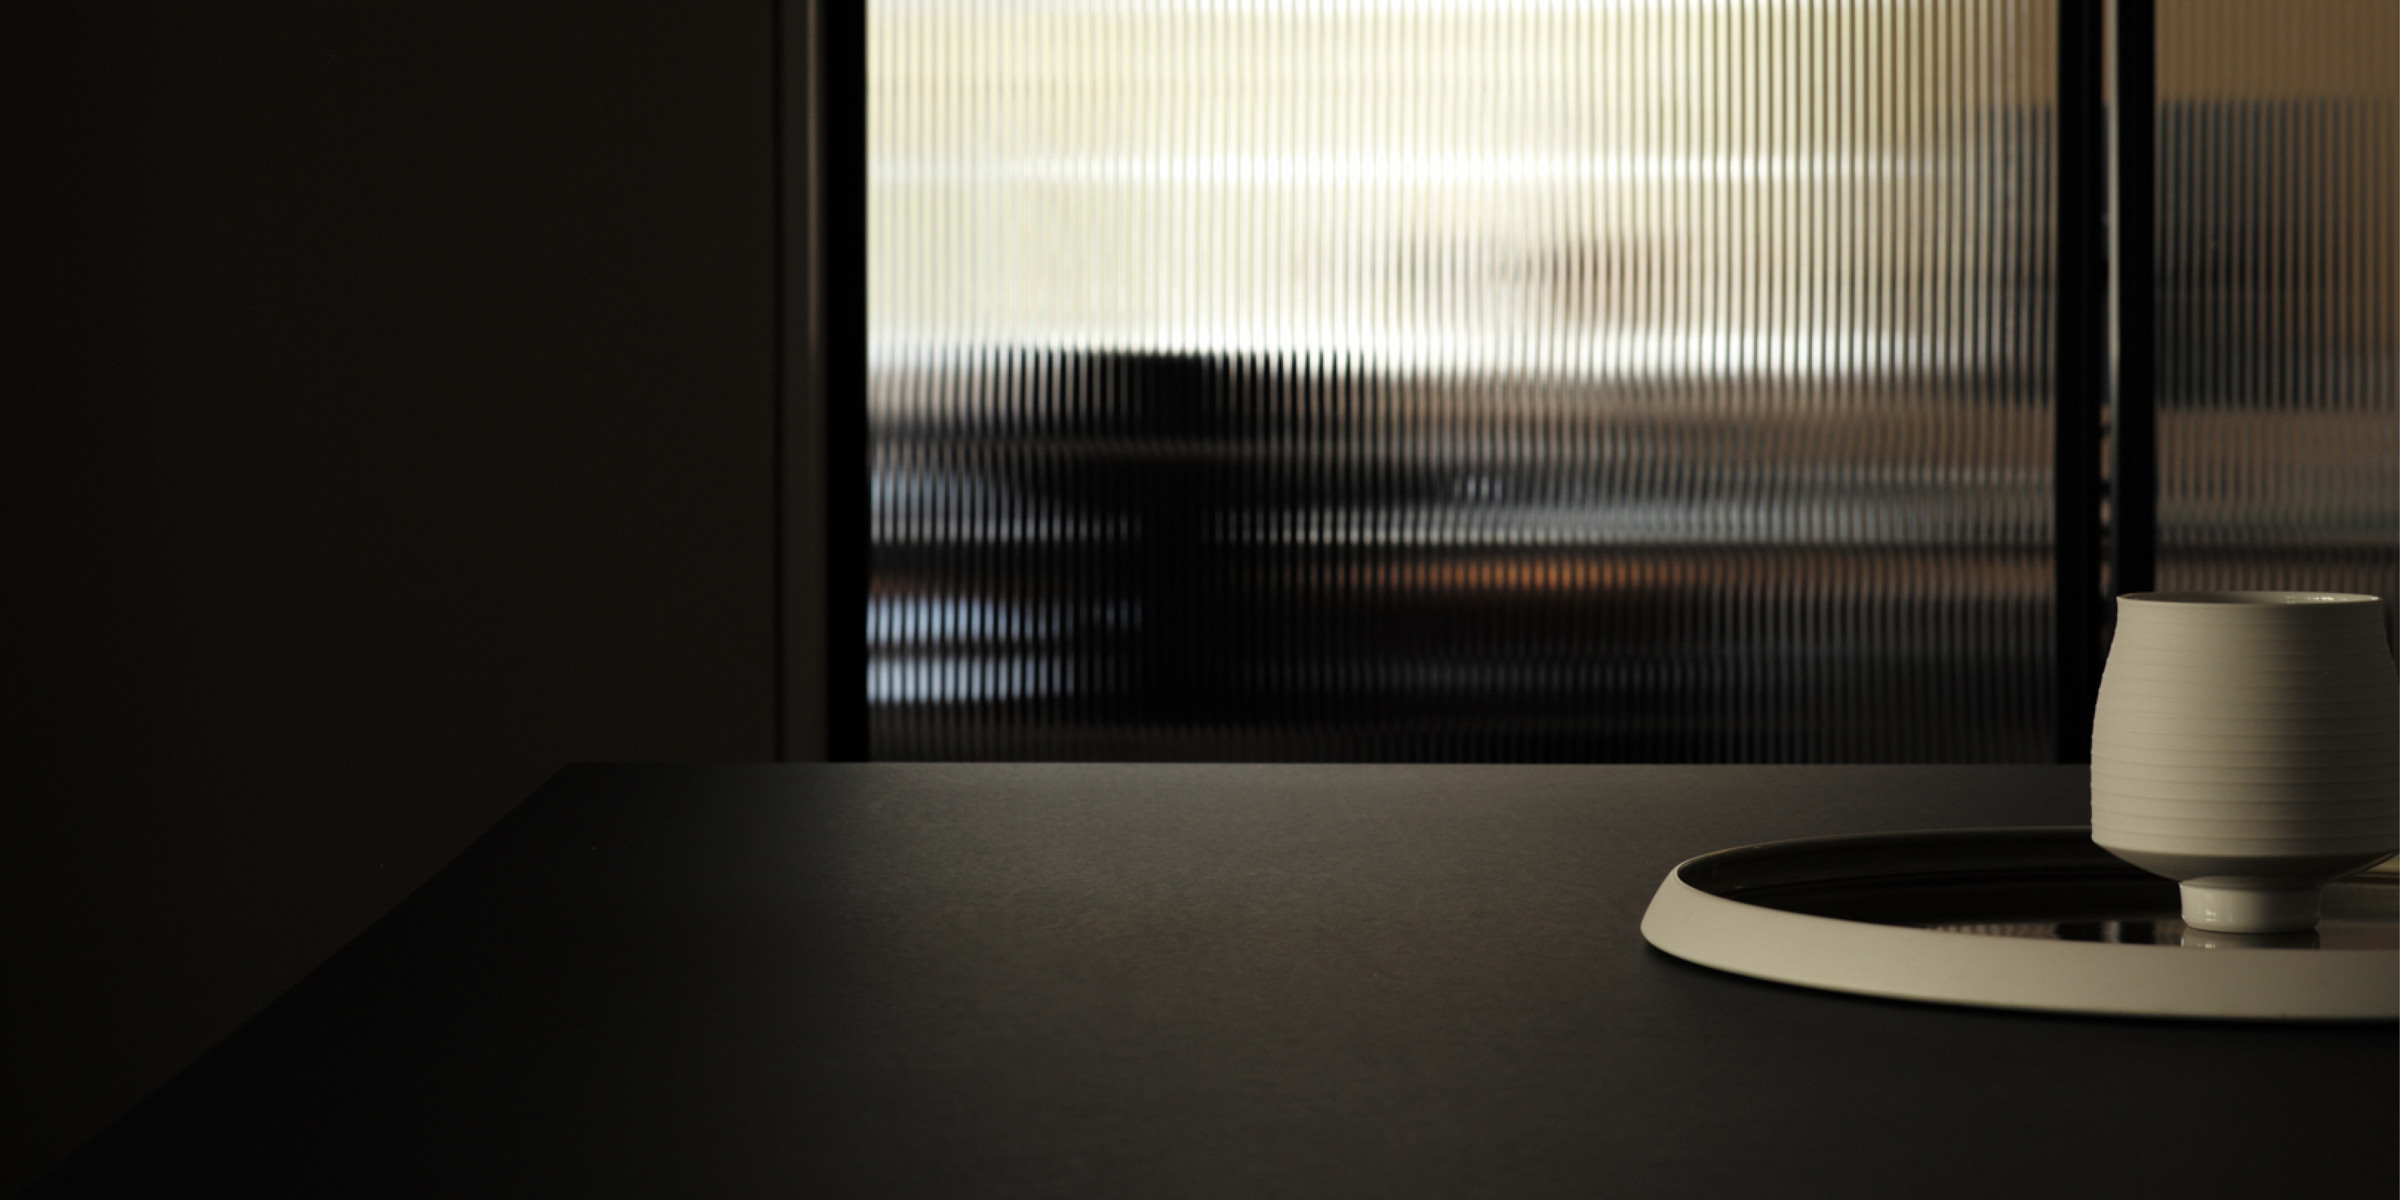 Header of website with porcelain objects in the front and glass door in the back